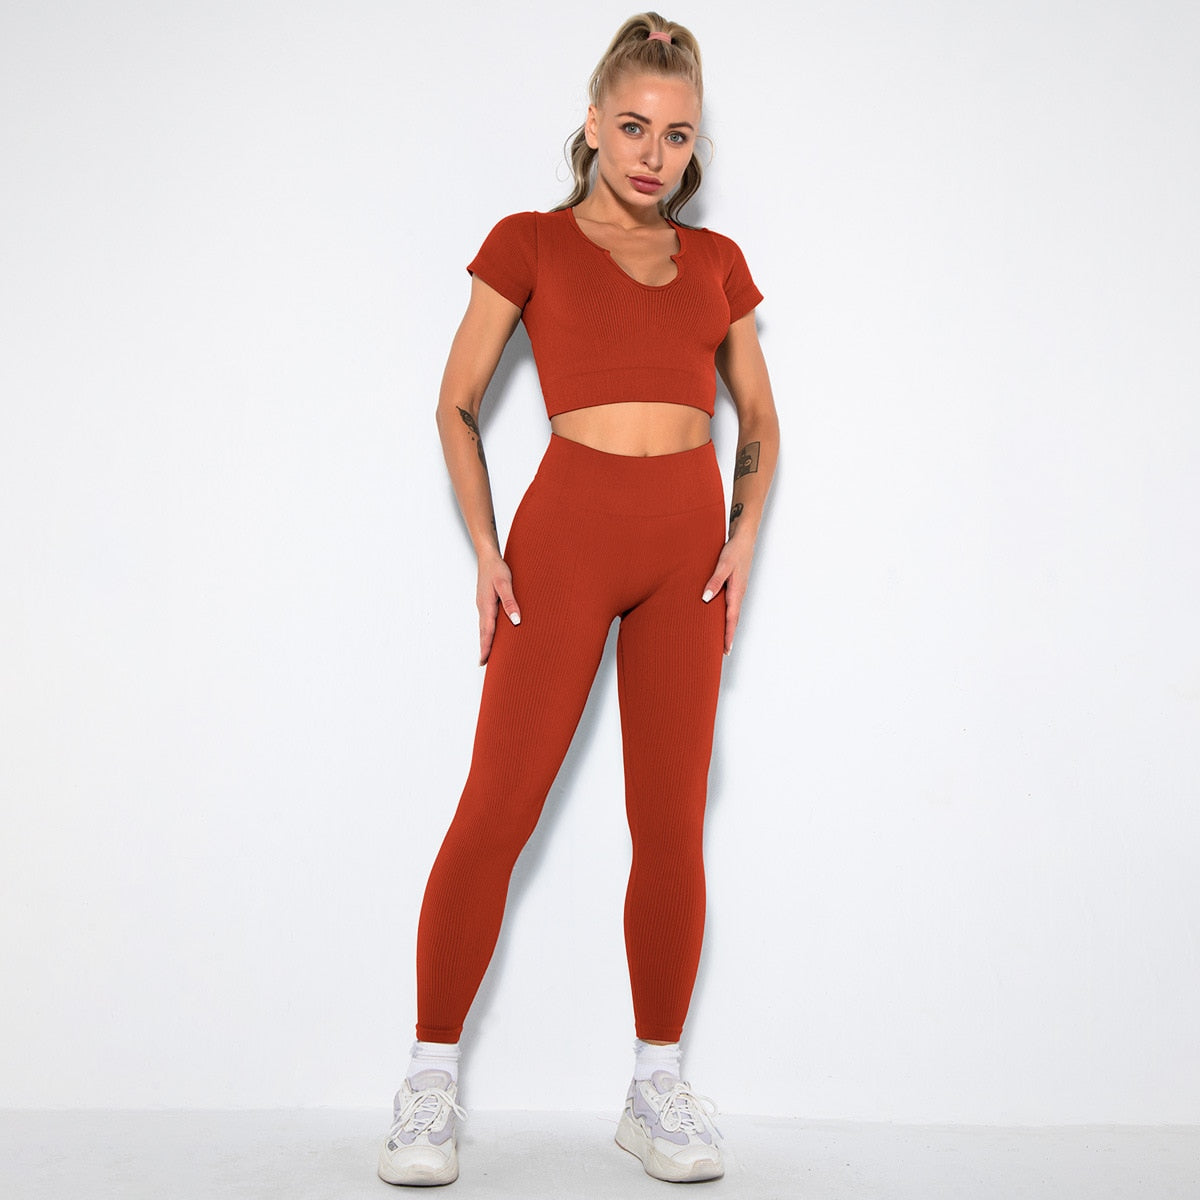 Seamless Yoga Set 2/3/4 Piece Gym Set Women Ribbed Crop Top Shorts Suits Fitness Sports Bra Leggings Running Outfits Tracksuit v2